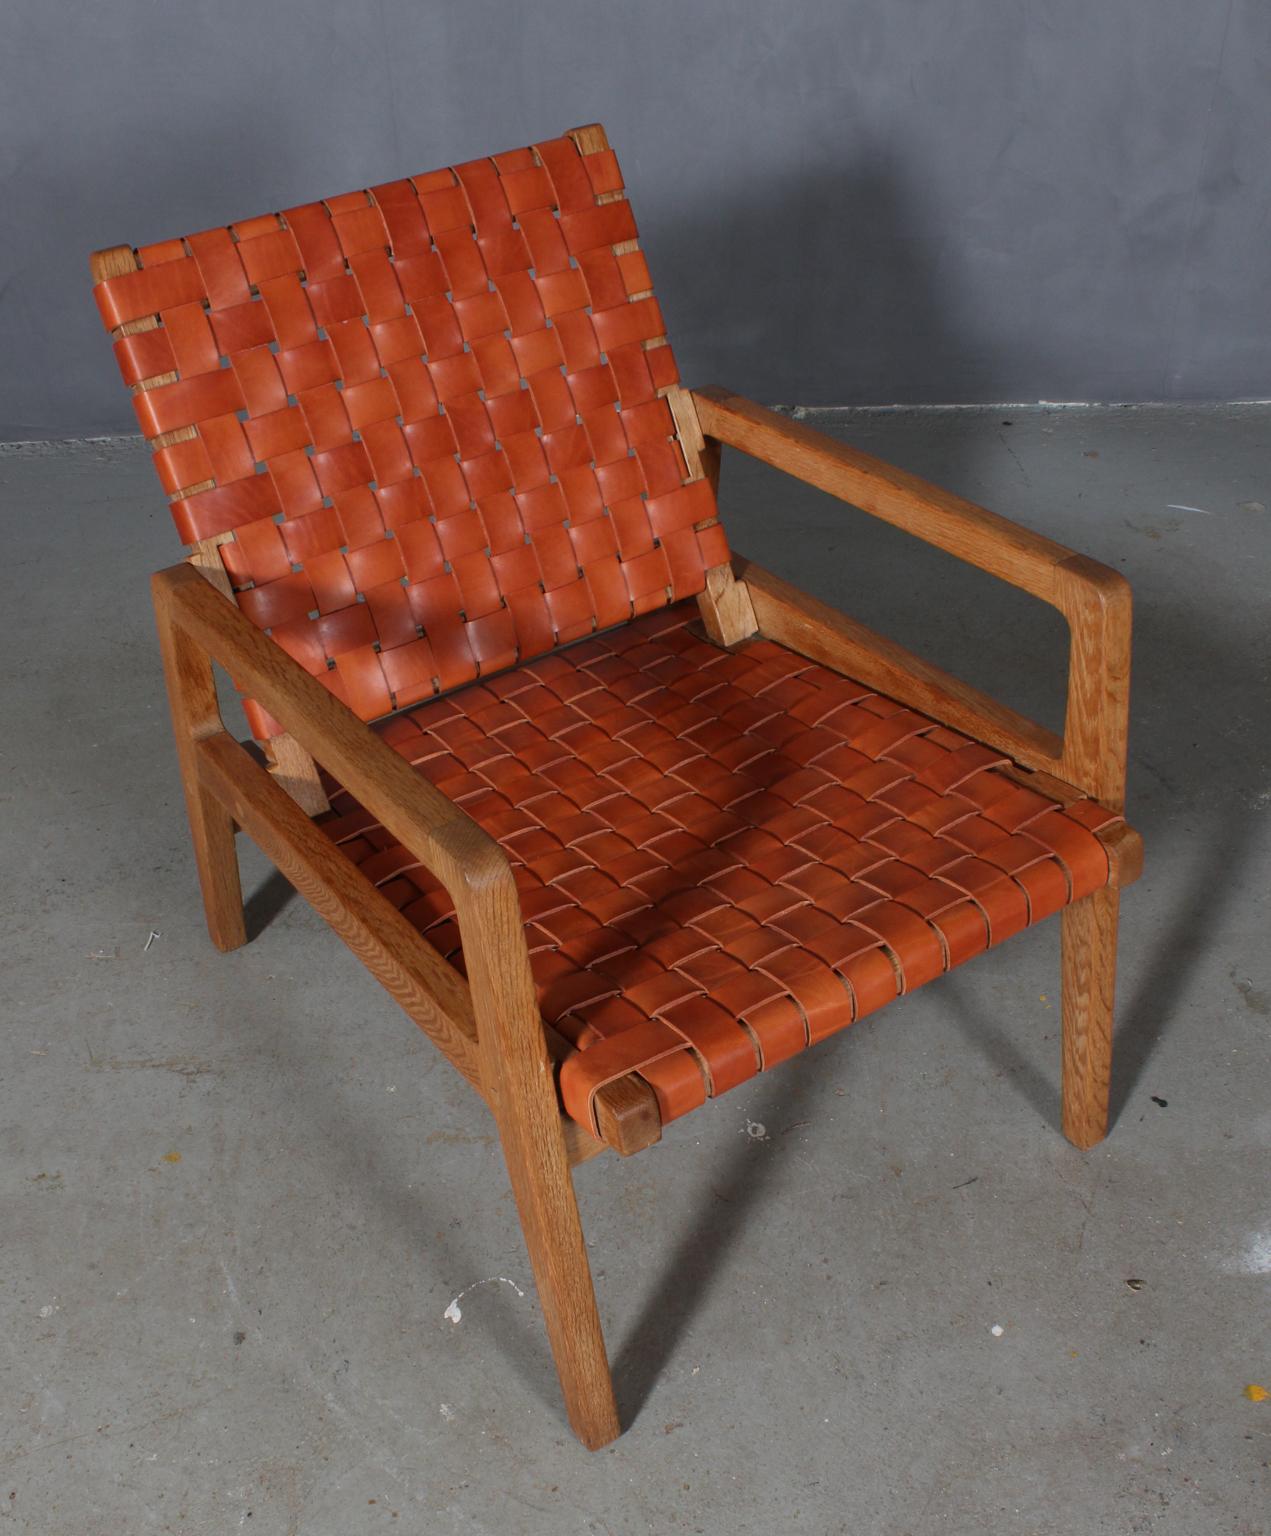 Tove & Edvard Kindt-Larsen, attributed. Lounge chair with frame of oak. 

Seat and back with leather straps.

Made in the 1940s apparently by Gustav Berthelsen.
 